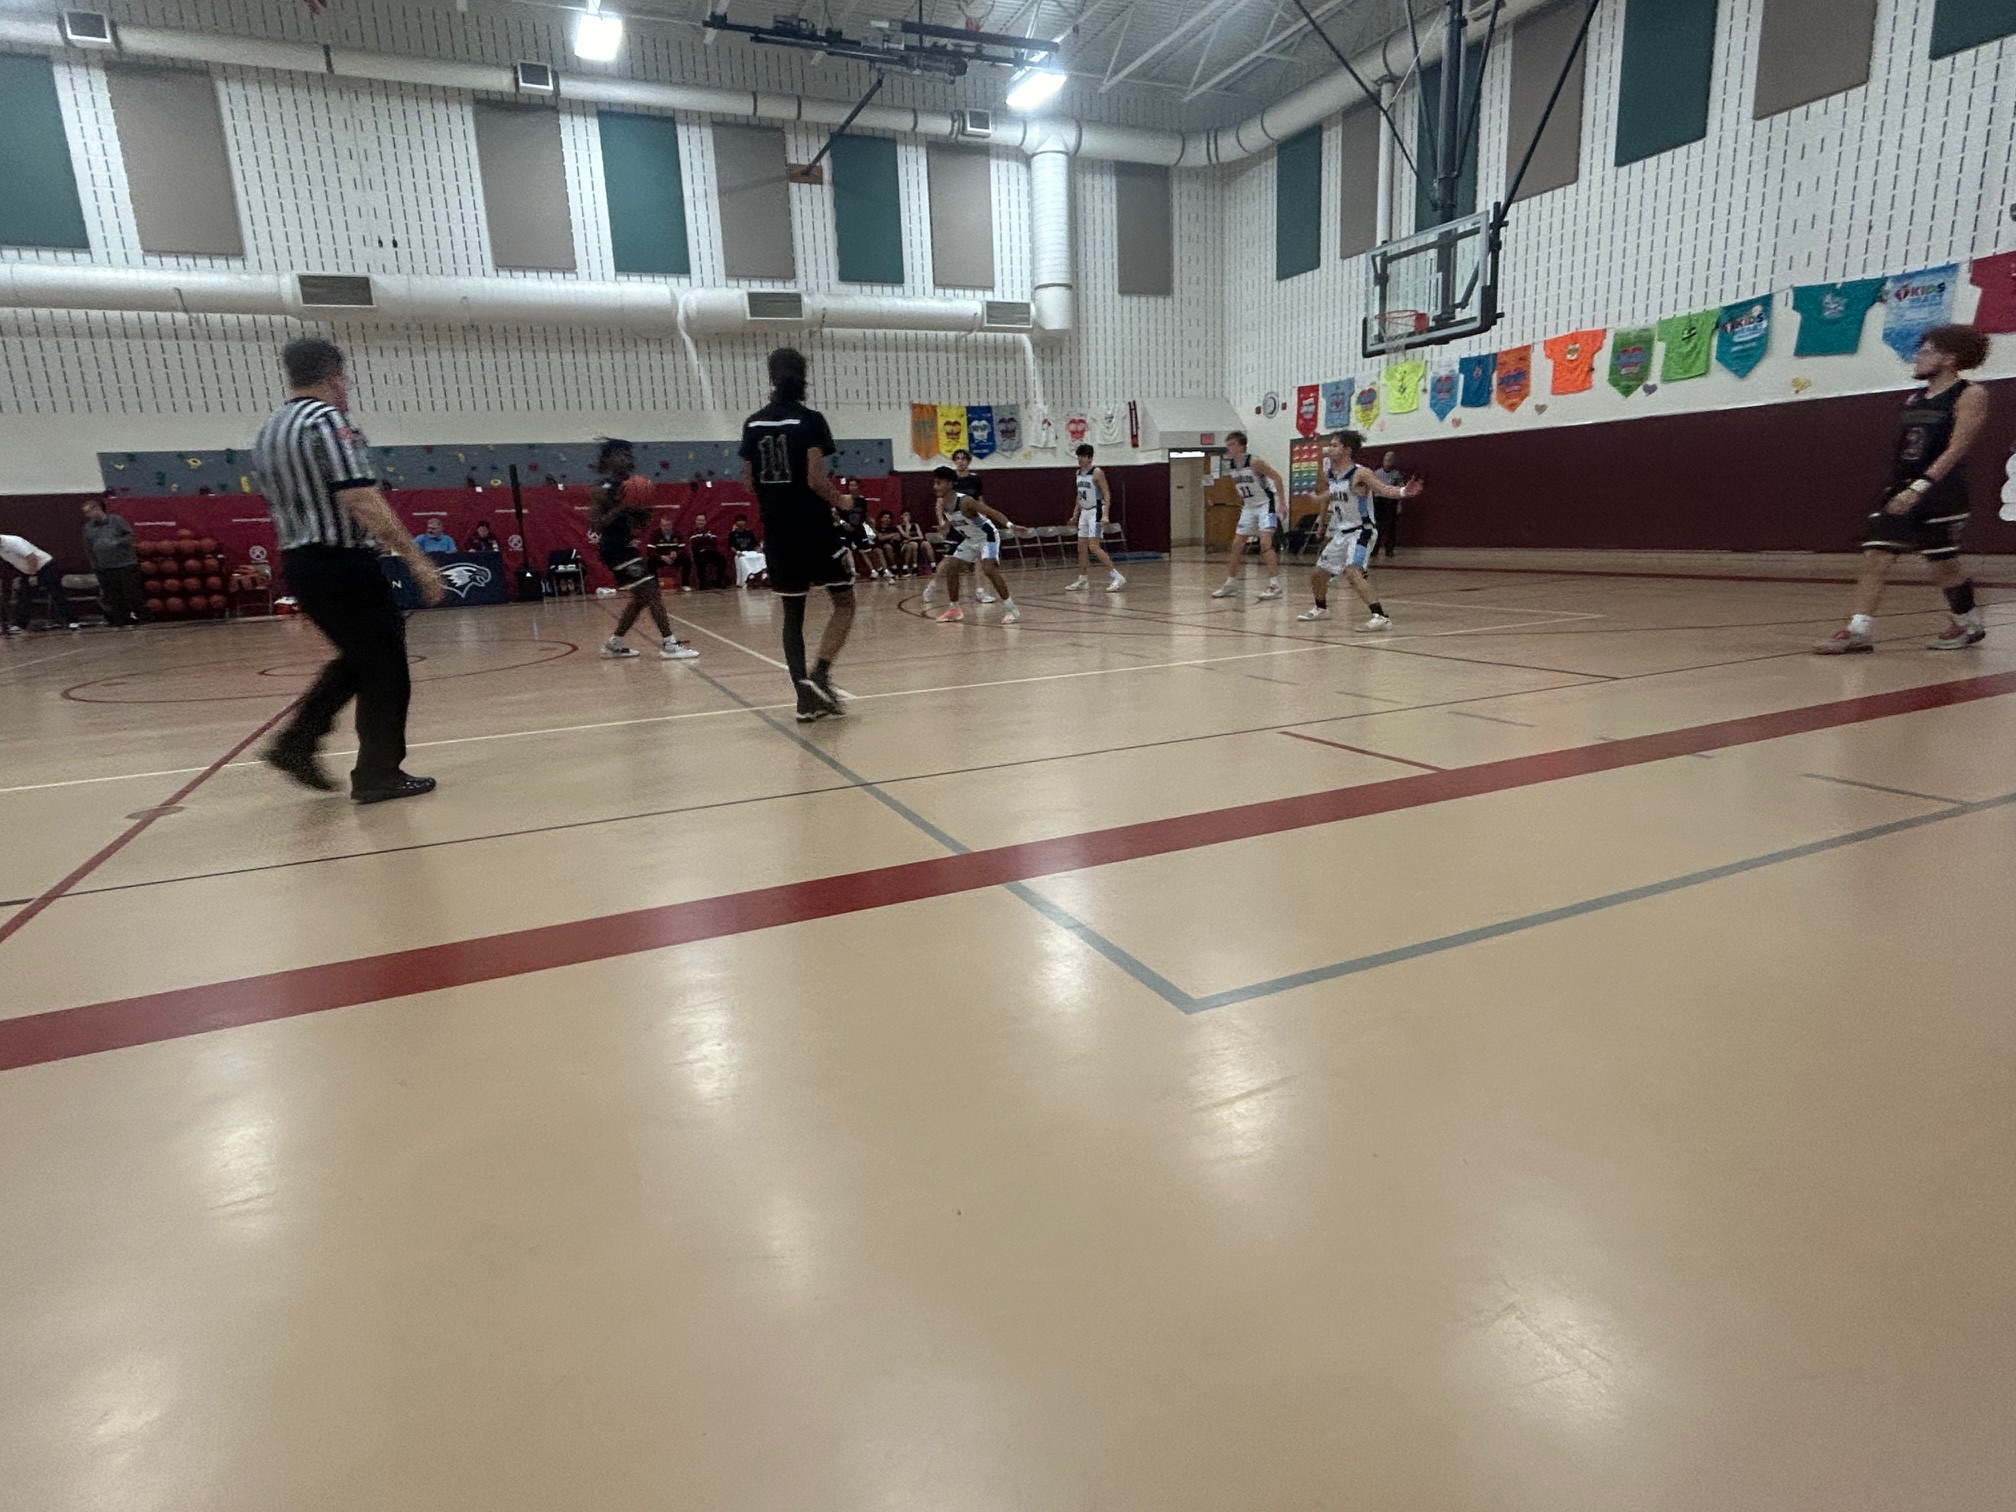 Lancaster Country Day Turns Up The Heat Following 32-Point Third Quarter Showing, 32 Forced Turnovers Overall To Stymie Lititz Christian In Regular Season Finale As Cougars Roar Into Postseason While Forced To ‘Figure Things Out’